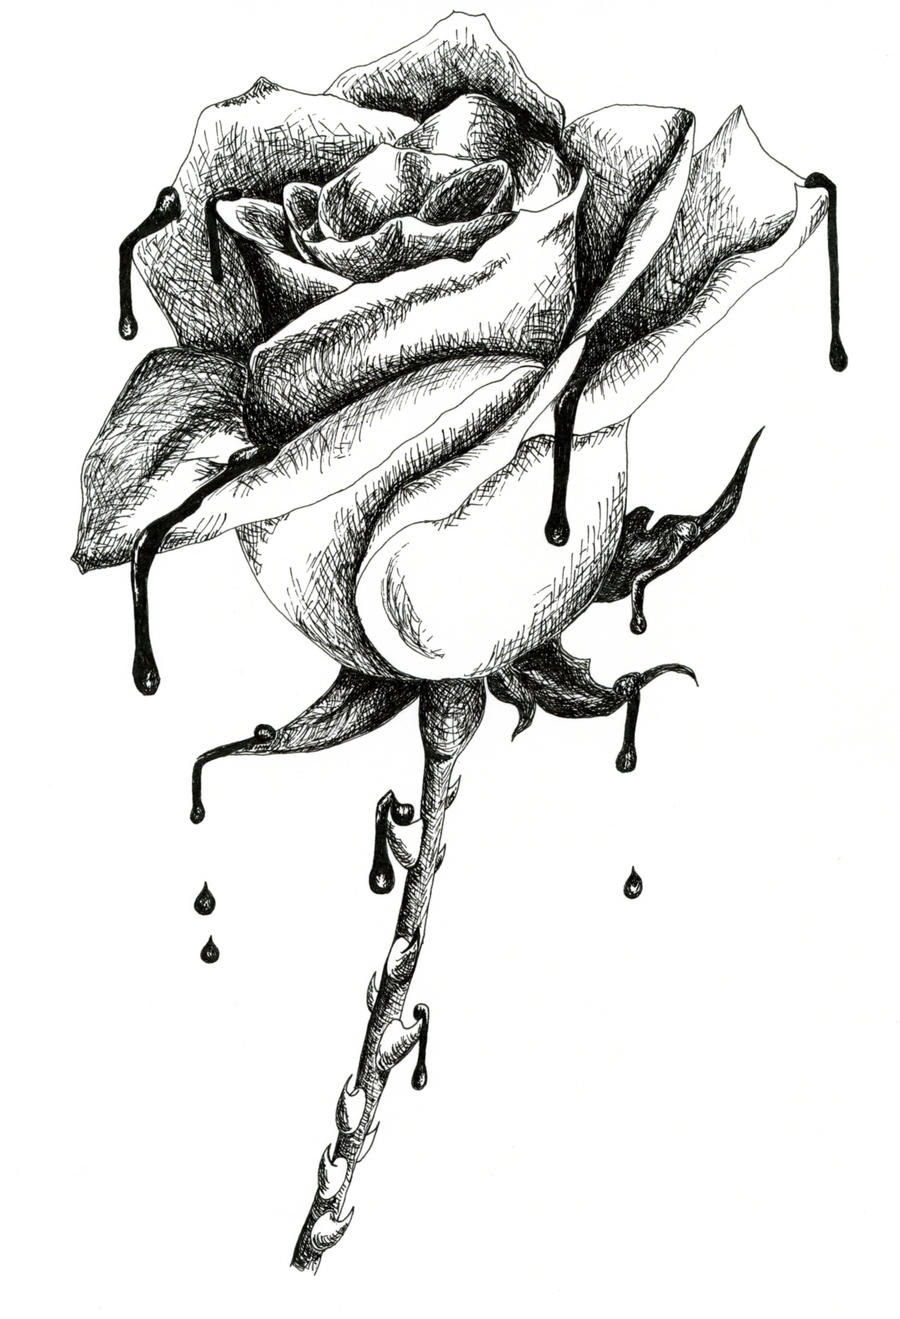 Rose Cross Hatching by Holliewood1391 on DeviantArt